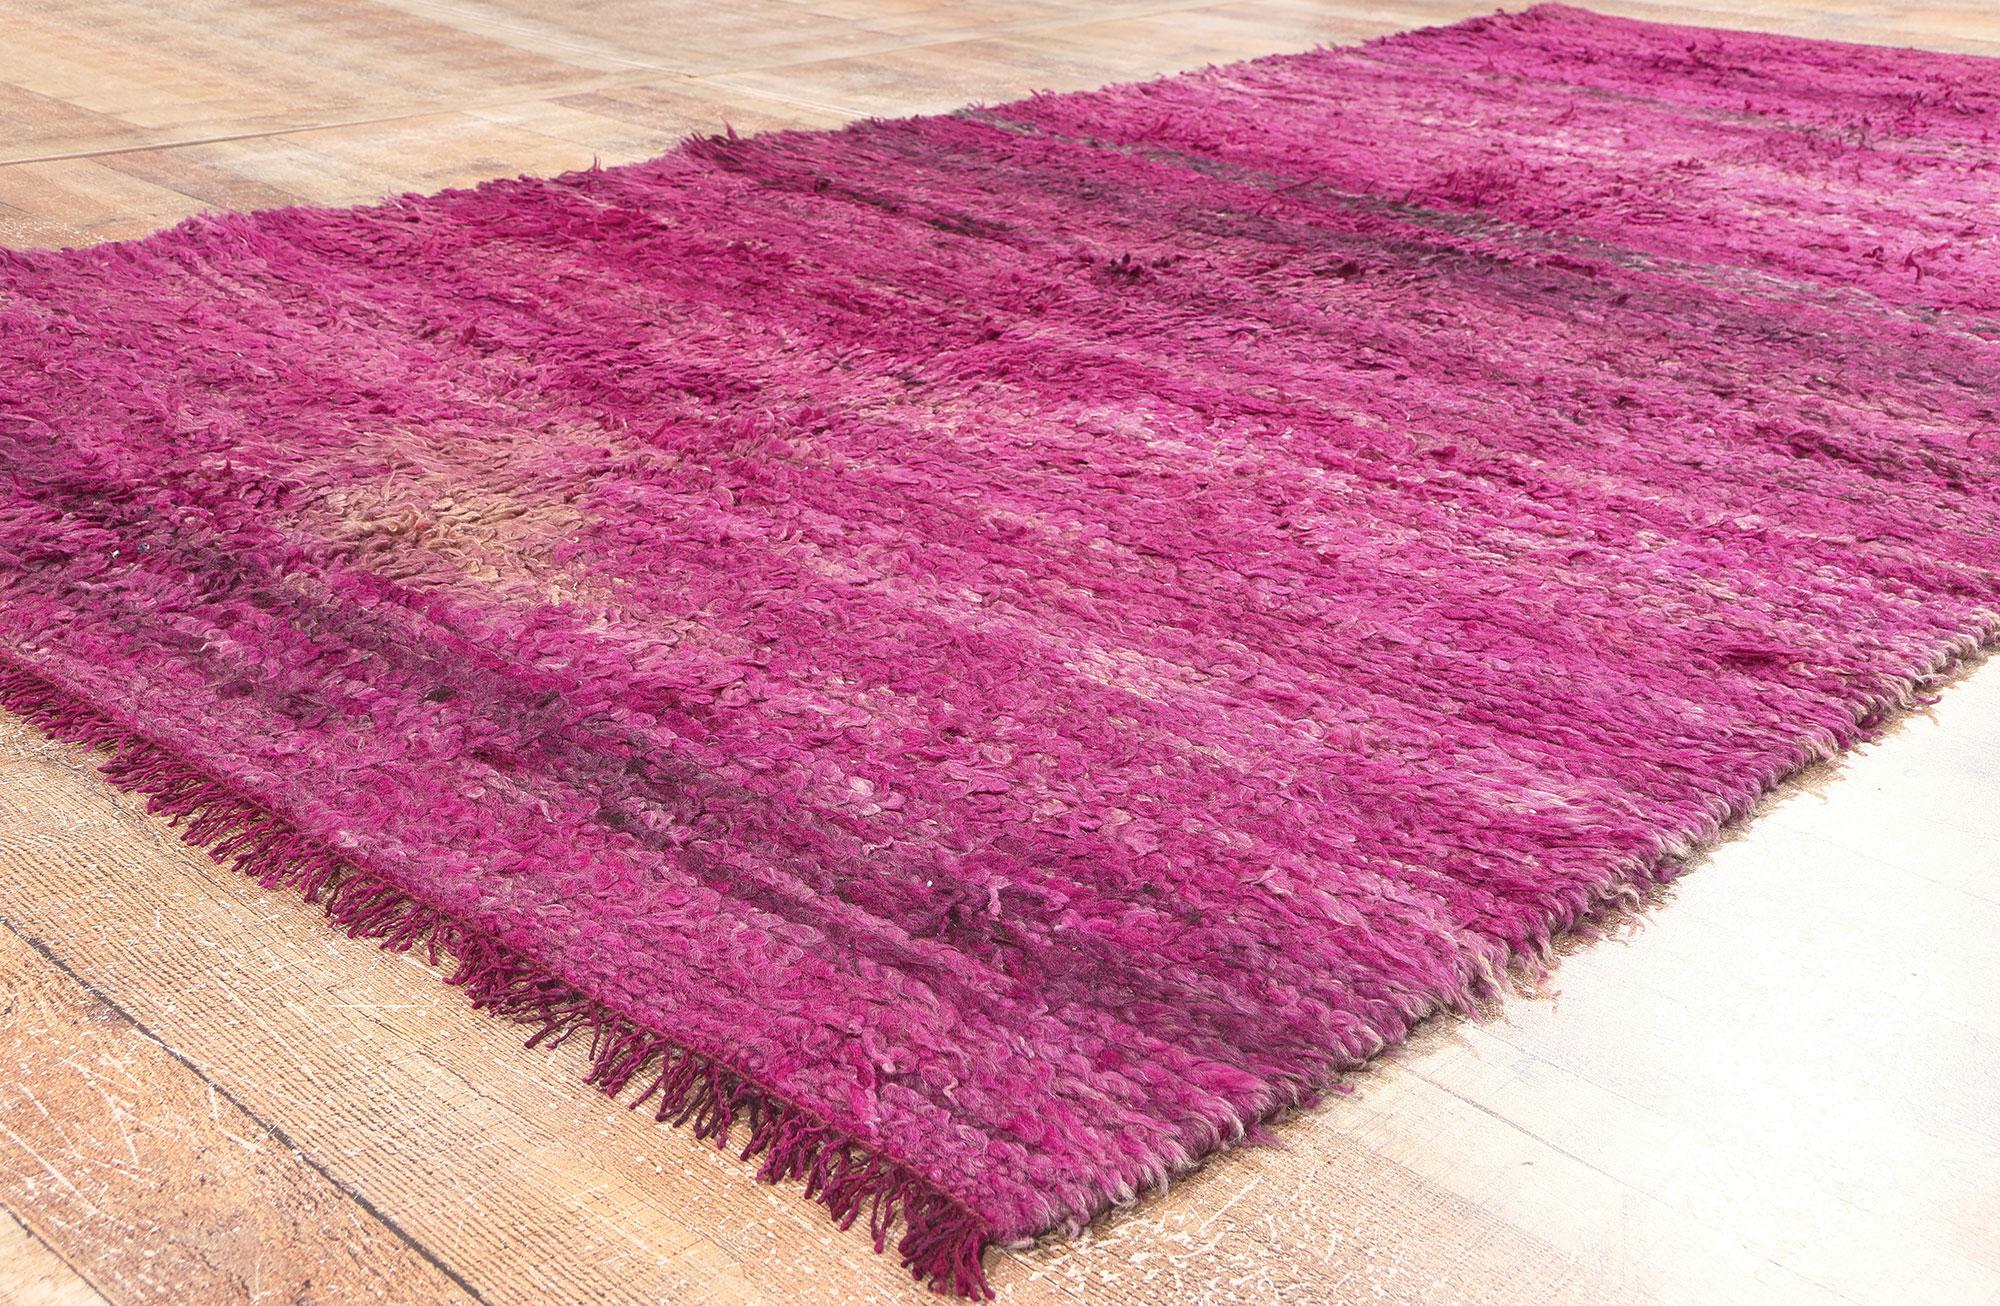 Reversible Vintage Beni MGuild Moroccan Rug, Boho Meets Abstract Expressionism In Good Condition For Sale In Dallas, TX